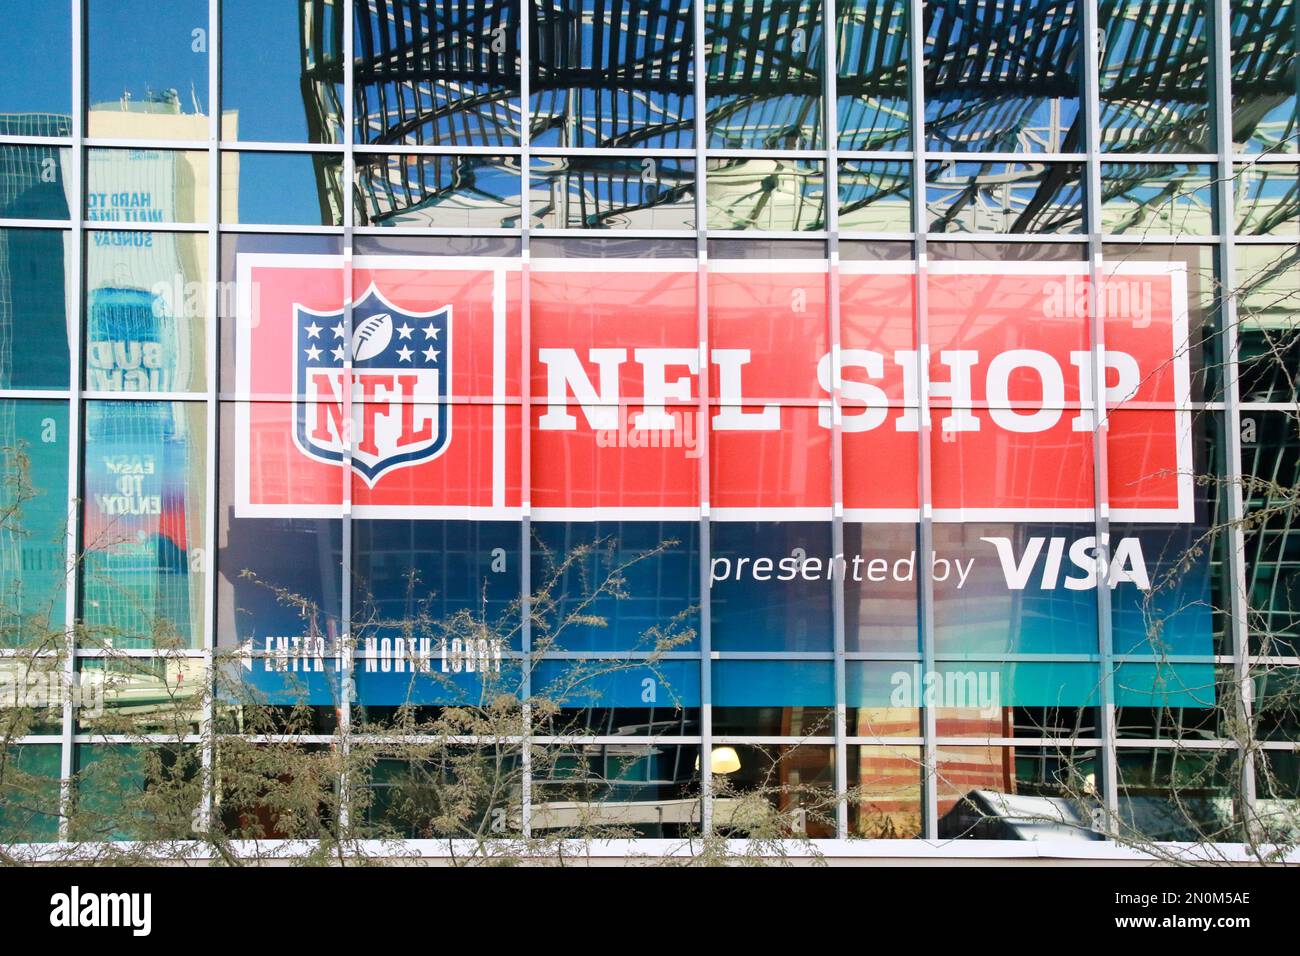 the nfl store